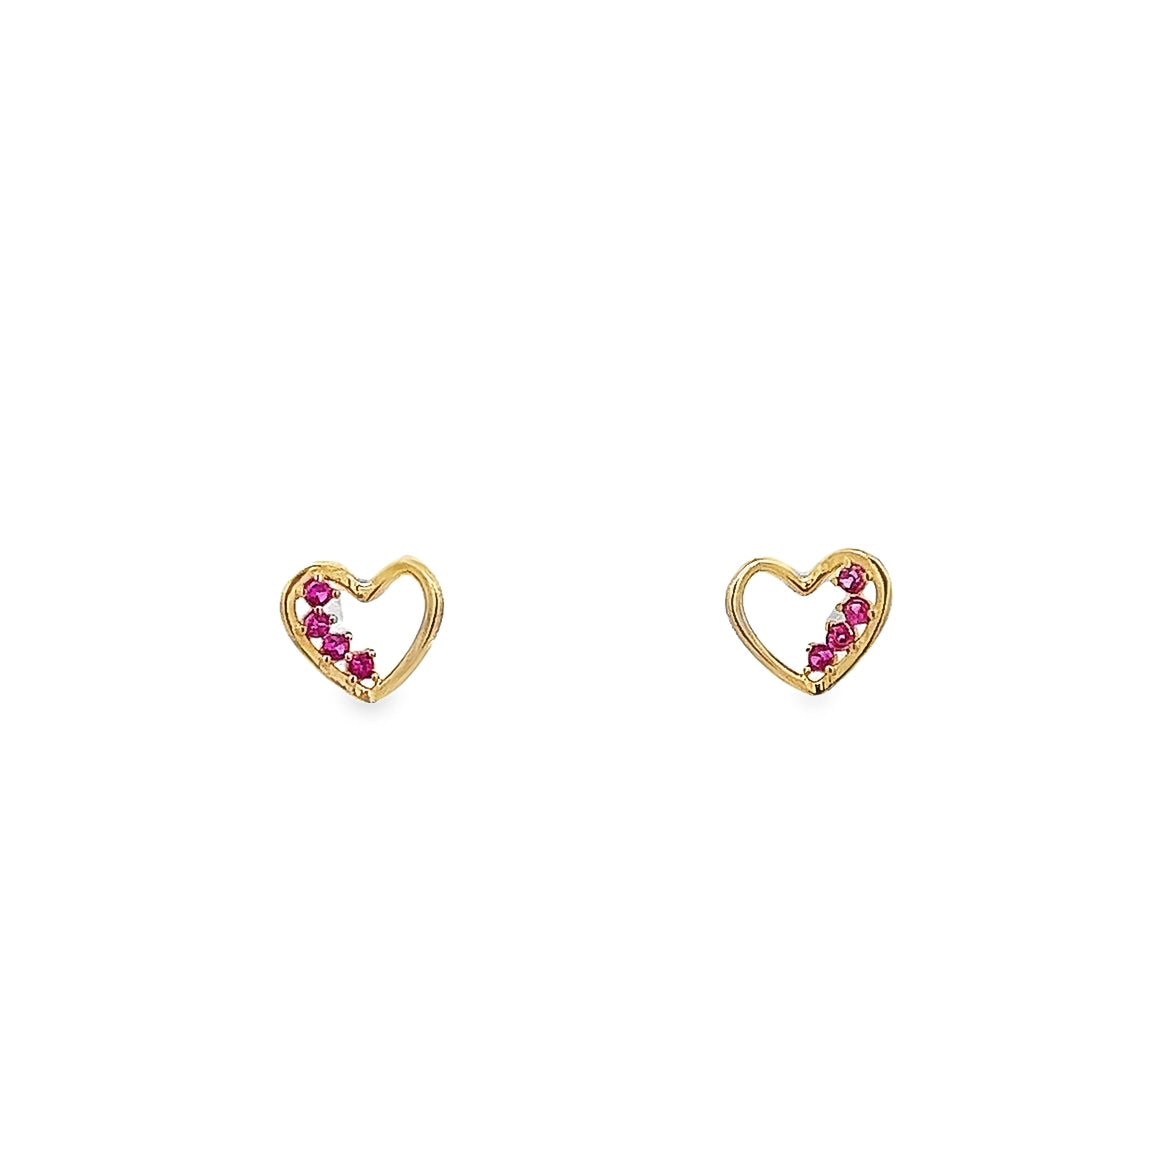 14K GOLD HEART AND PINK CRYSTALS EARRINGS